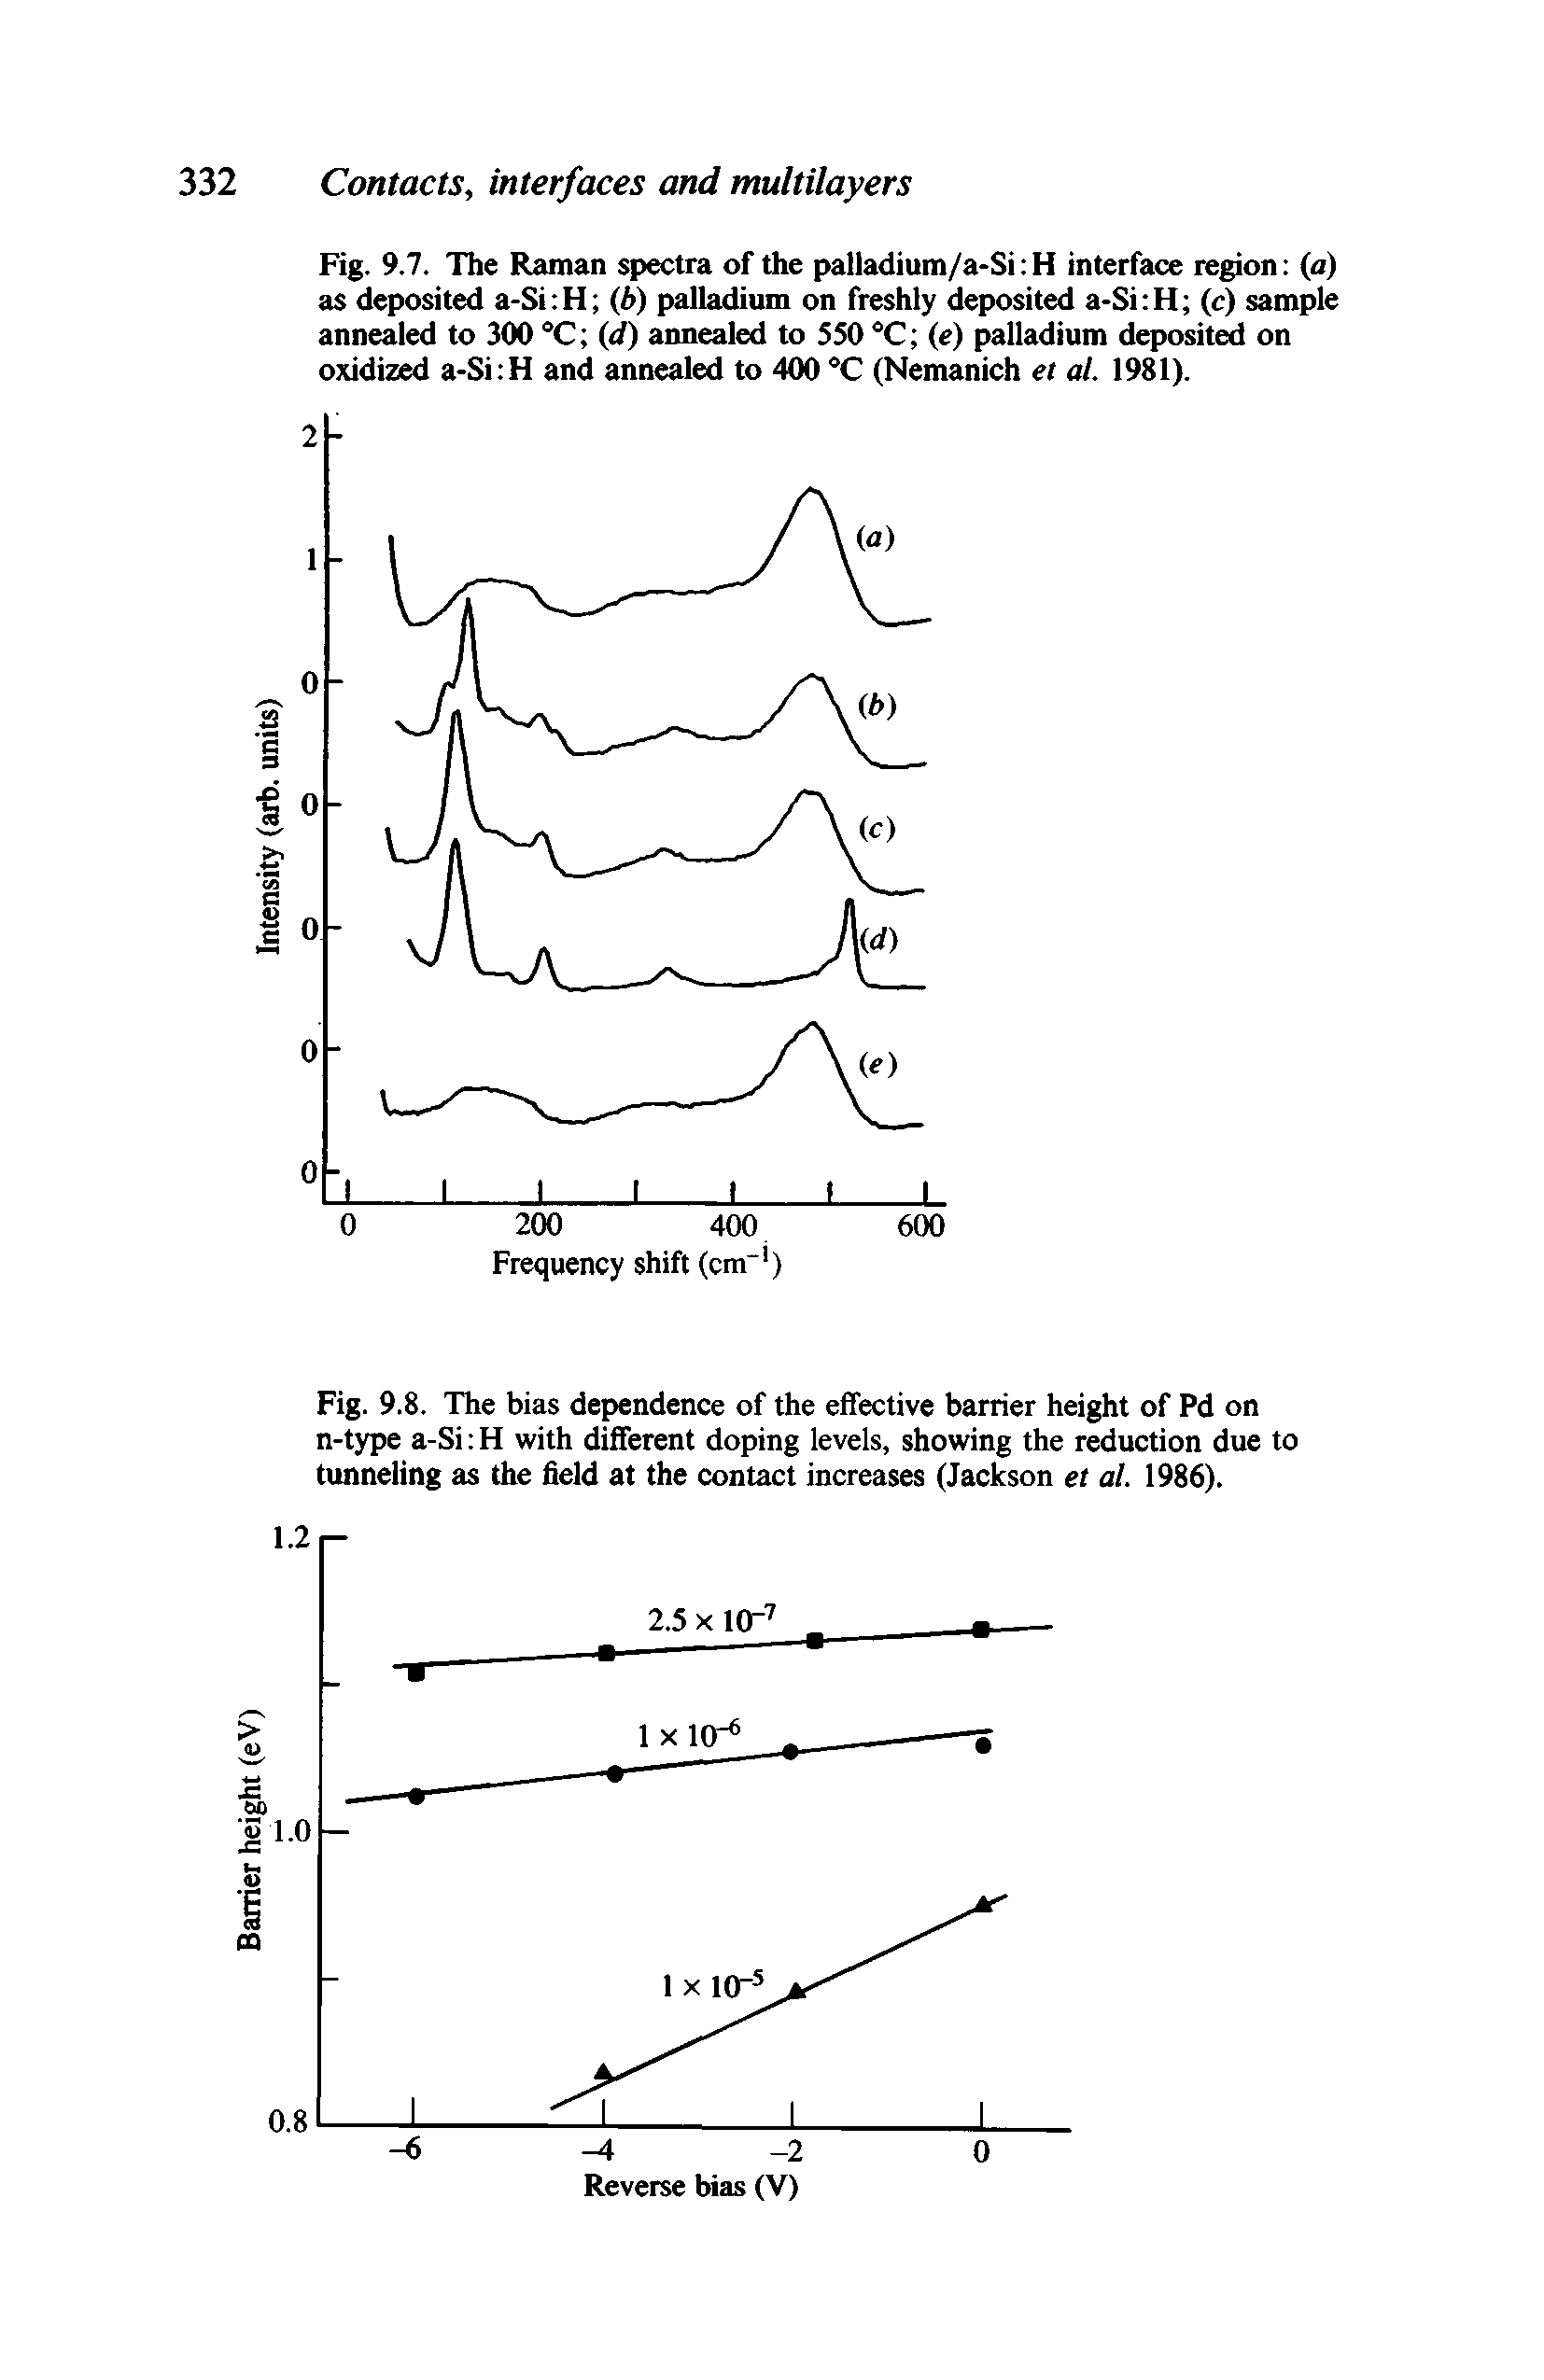 Fig. 9.7. The Raman spectra of the palladium/a-Si H interface region (a) as deposited a-Si H (b) palladium on freshly deposited a-Si H (c) sample annealed to 300 C (d) annealed to 550 °C (e) palladium deposited on oxidized a-Si H and annealed to 400 °C (Nemanich et at. 1981).